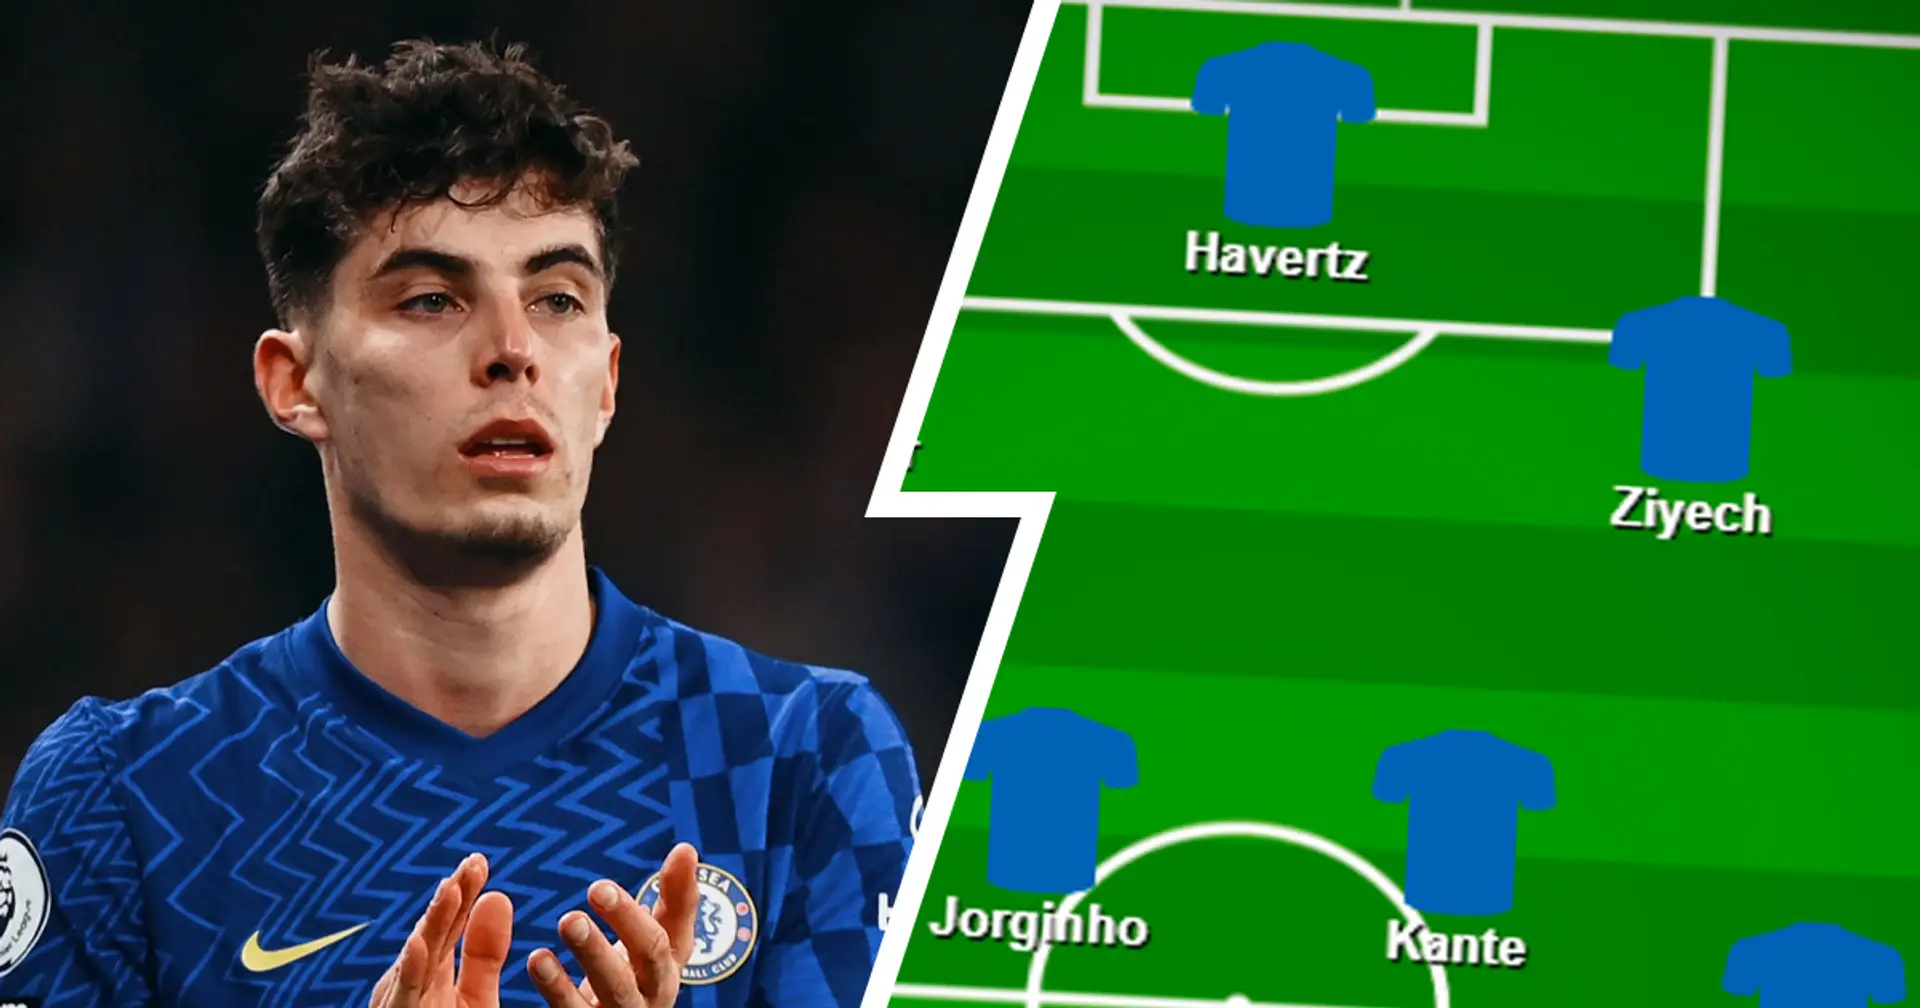 Time for Havertz to start? Select your preferred Chelsea XI vs Al Hilal from 2 options